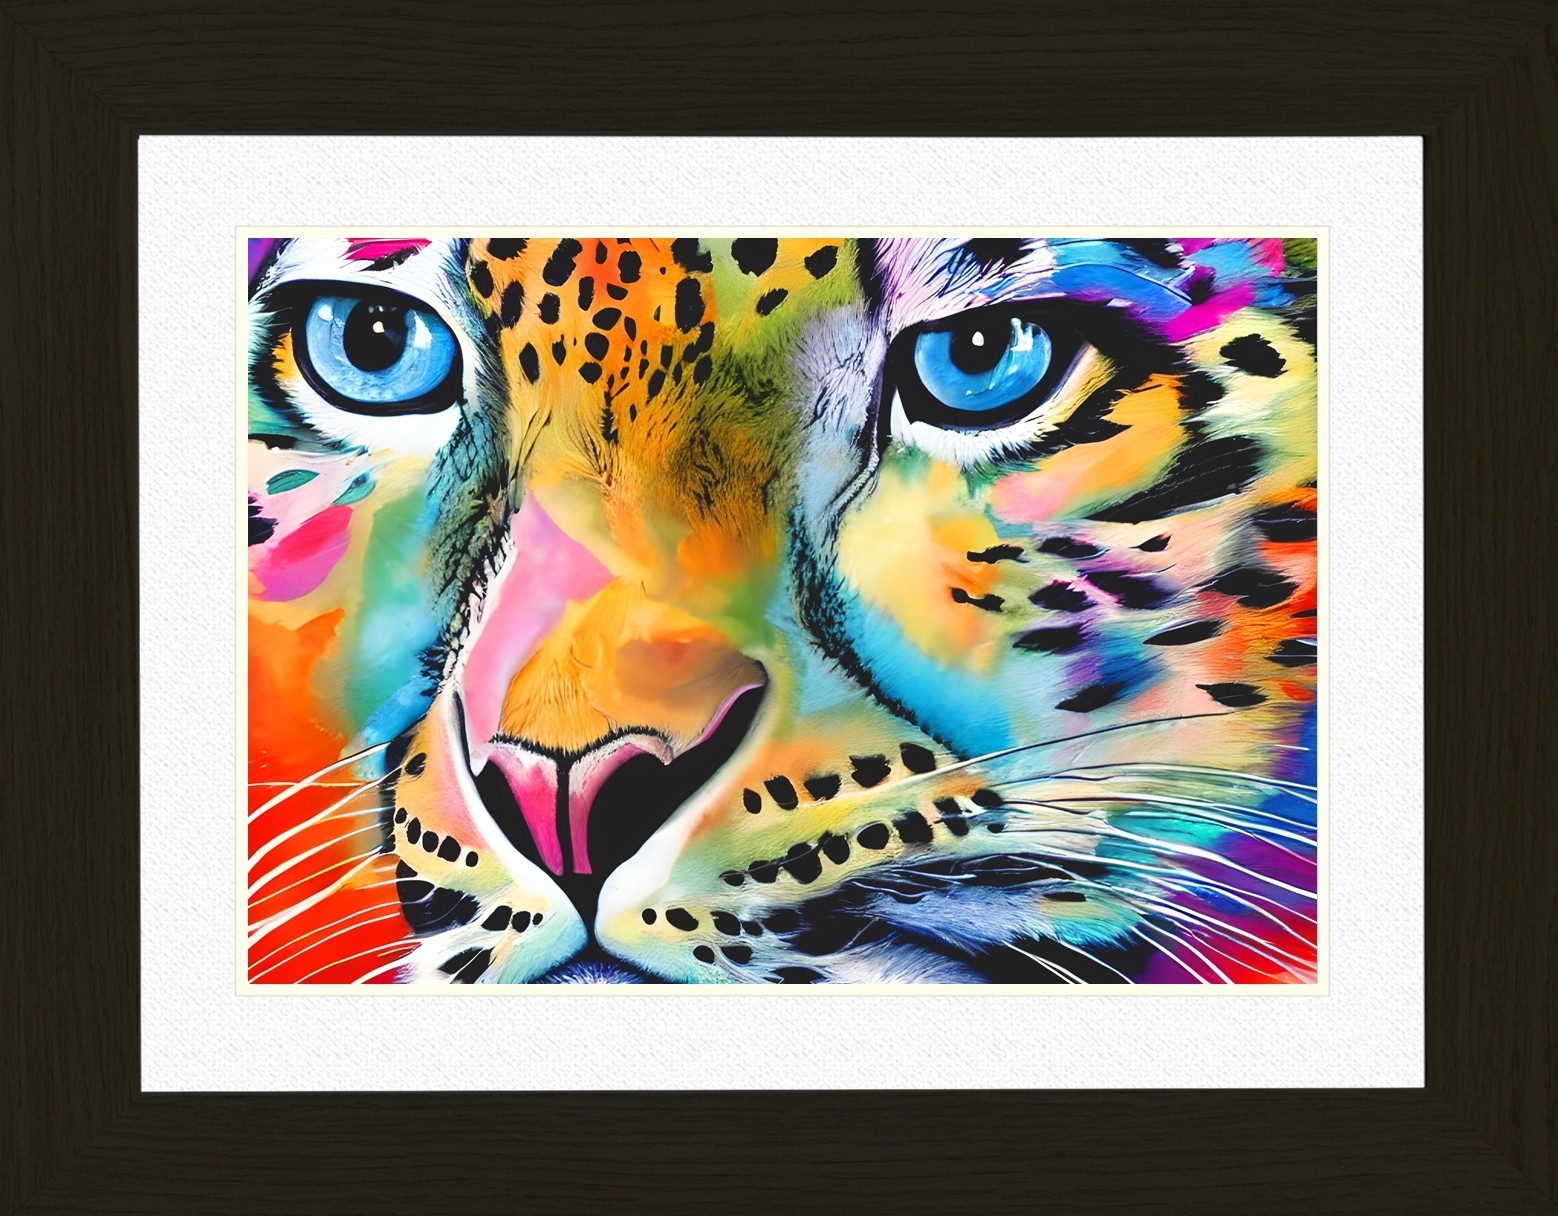 Snow Leopard Animal Picture Framed Colourful Abstract Art (A3 Black Frame)